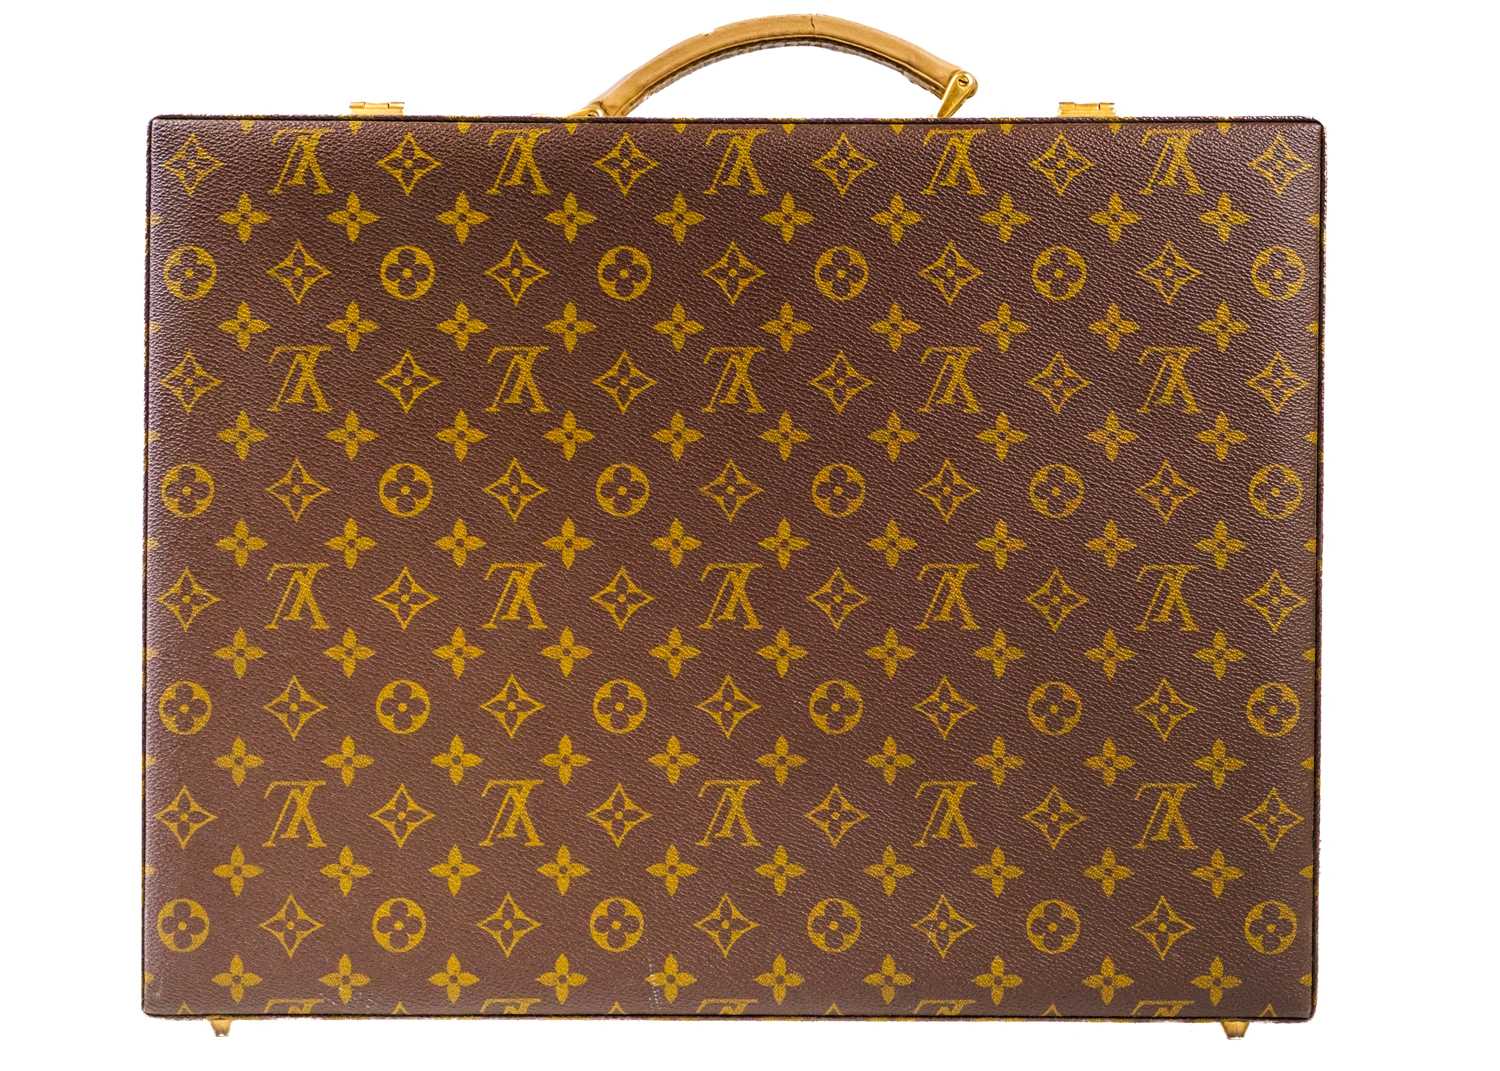 LOUIS VUITTON - A monogram briefcase with combination locks. - Image 2 of 4